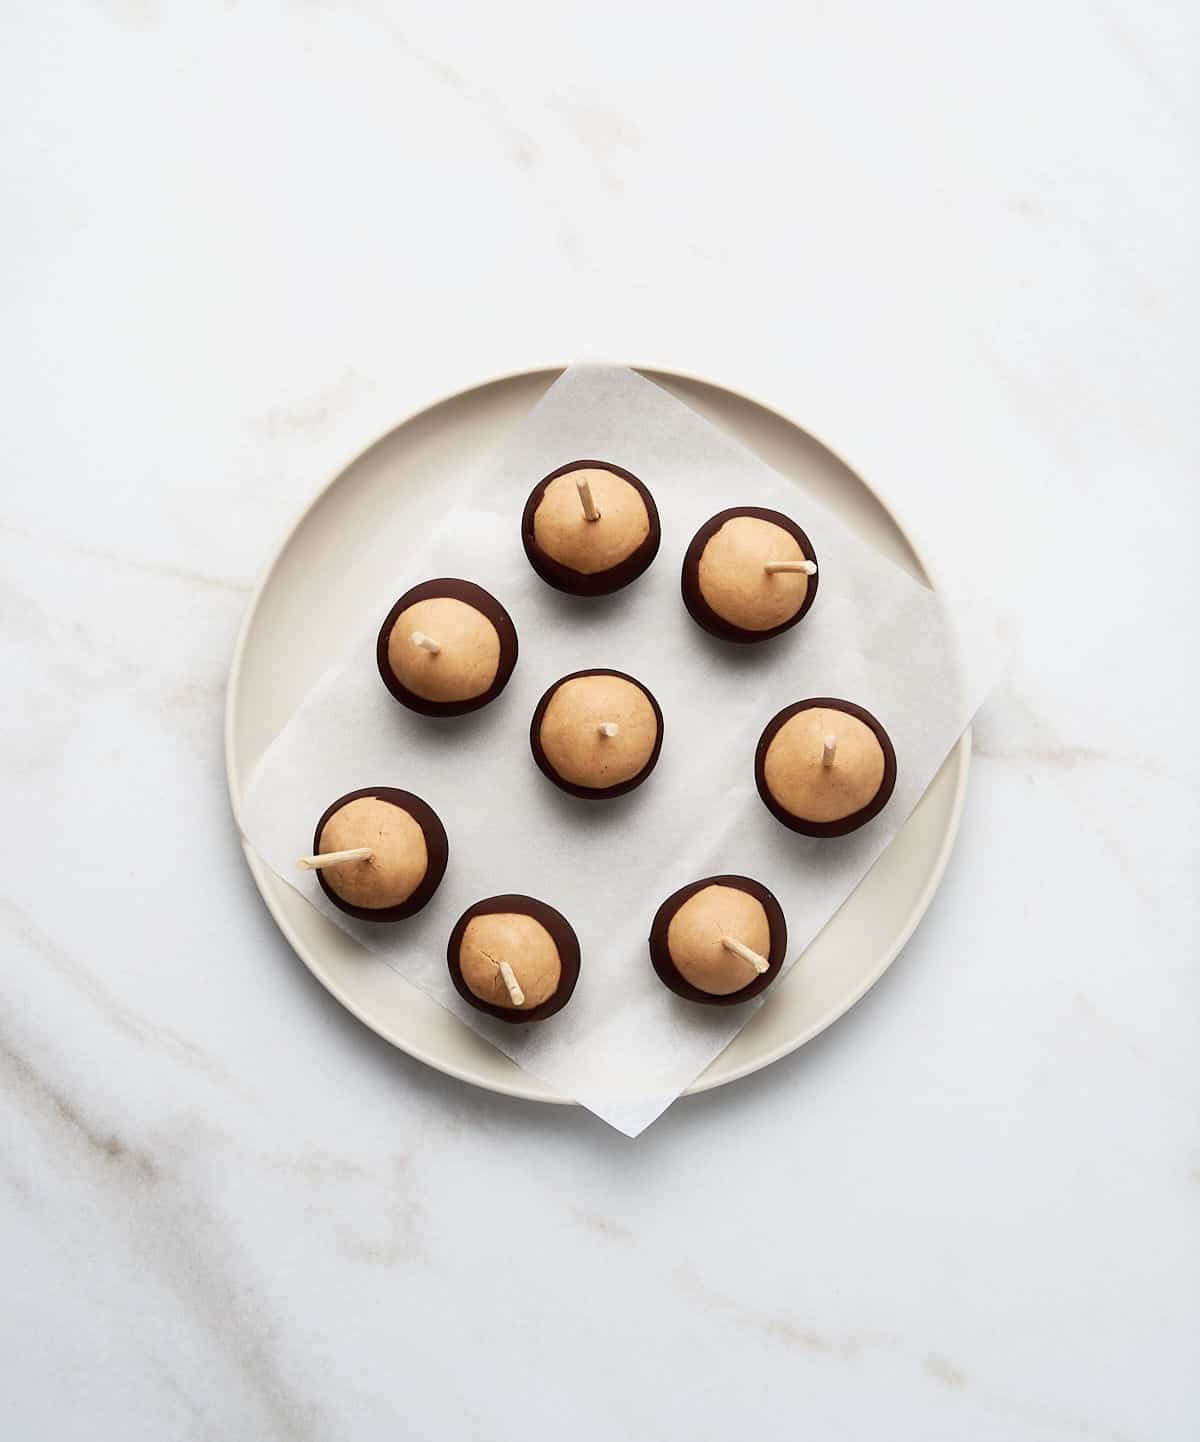 Buckeye candy balls on a whitish plate with parchment paper on white marble. 